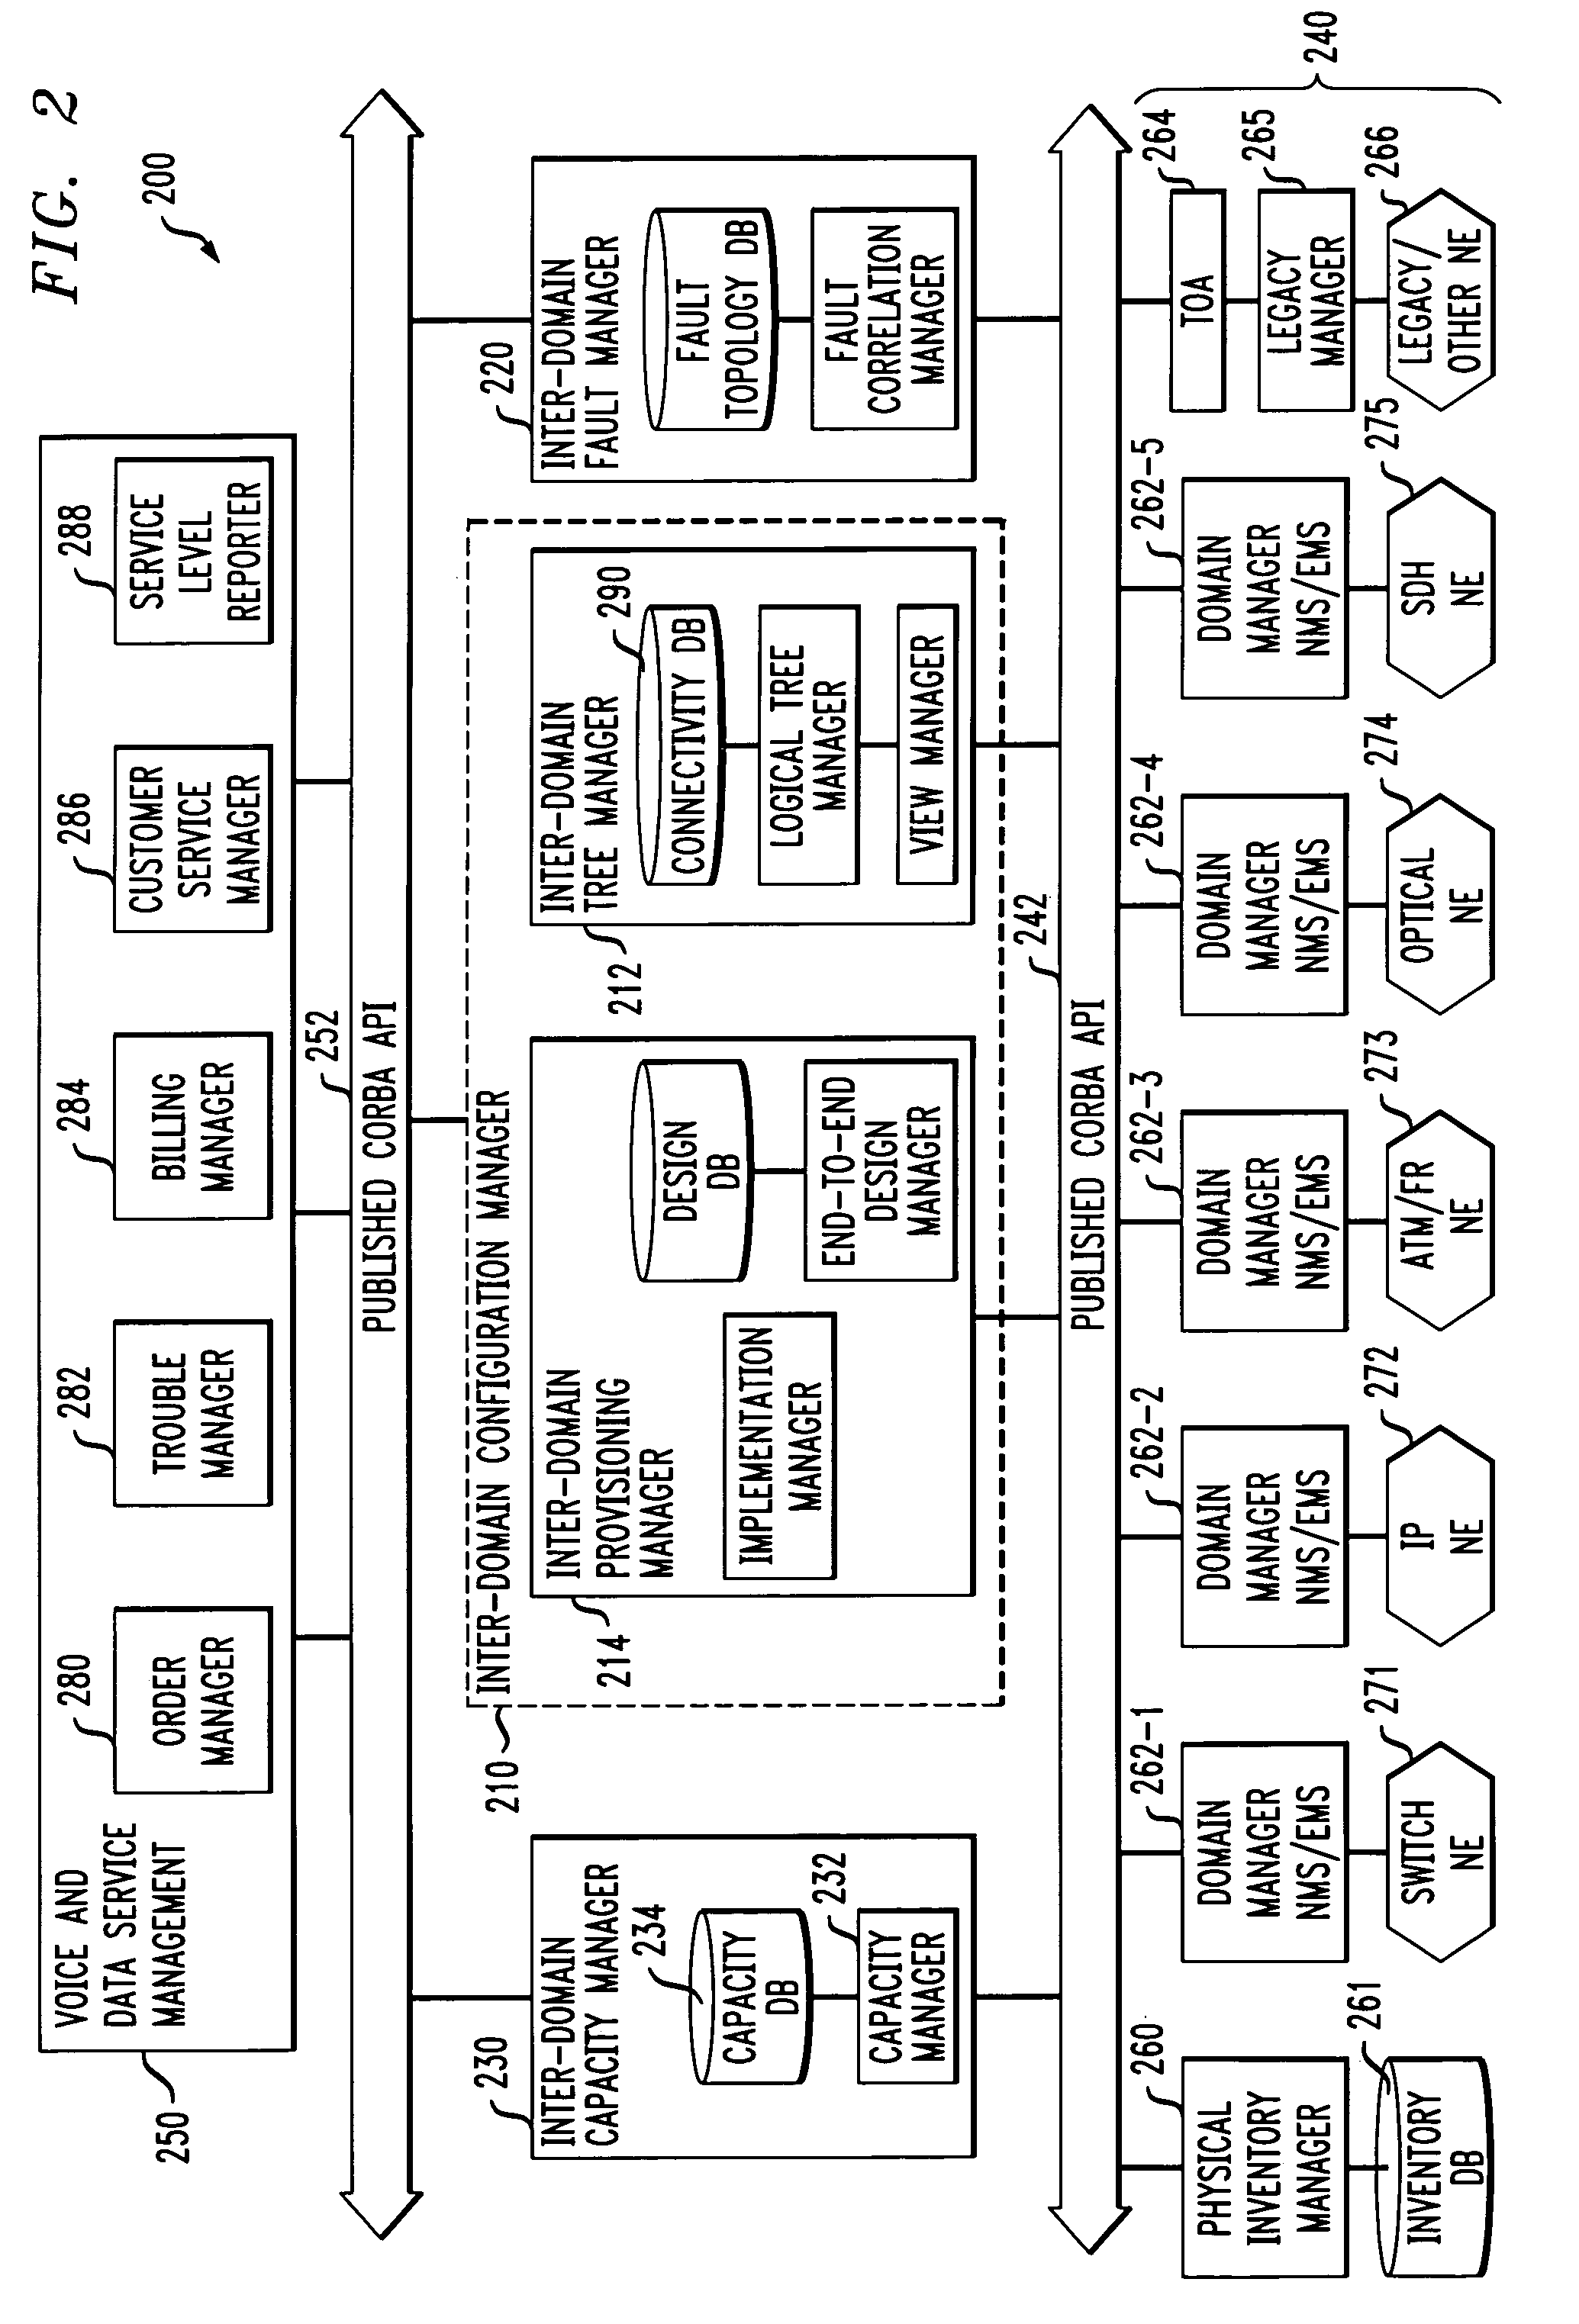 Inter-domain network management system for multi-layer networks